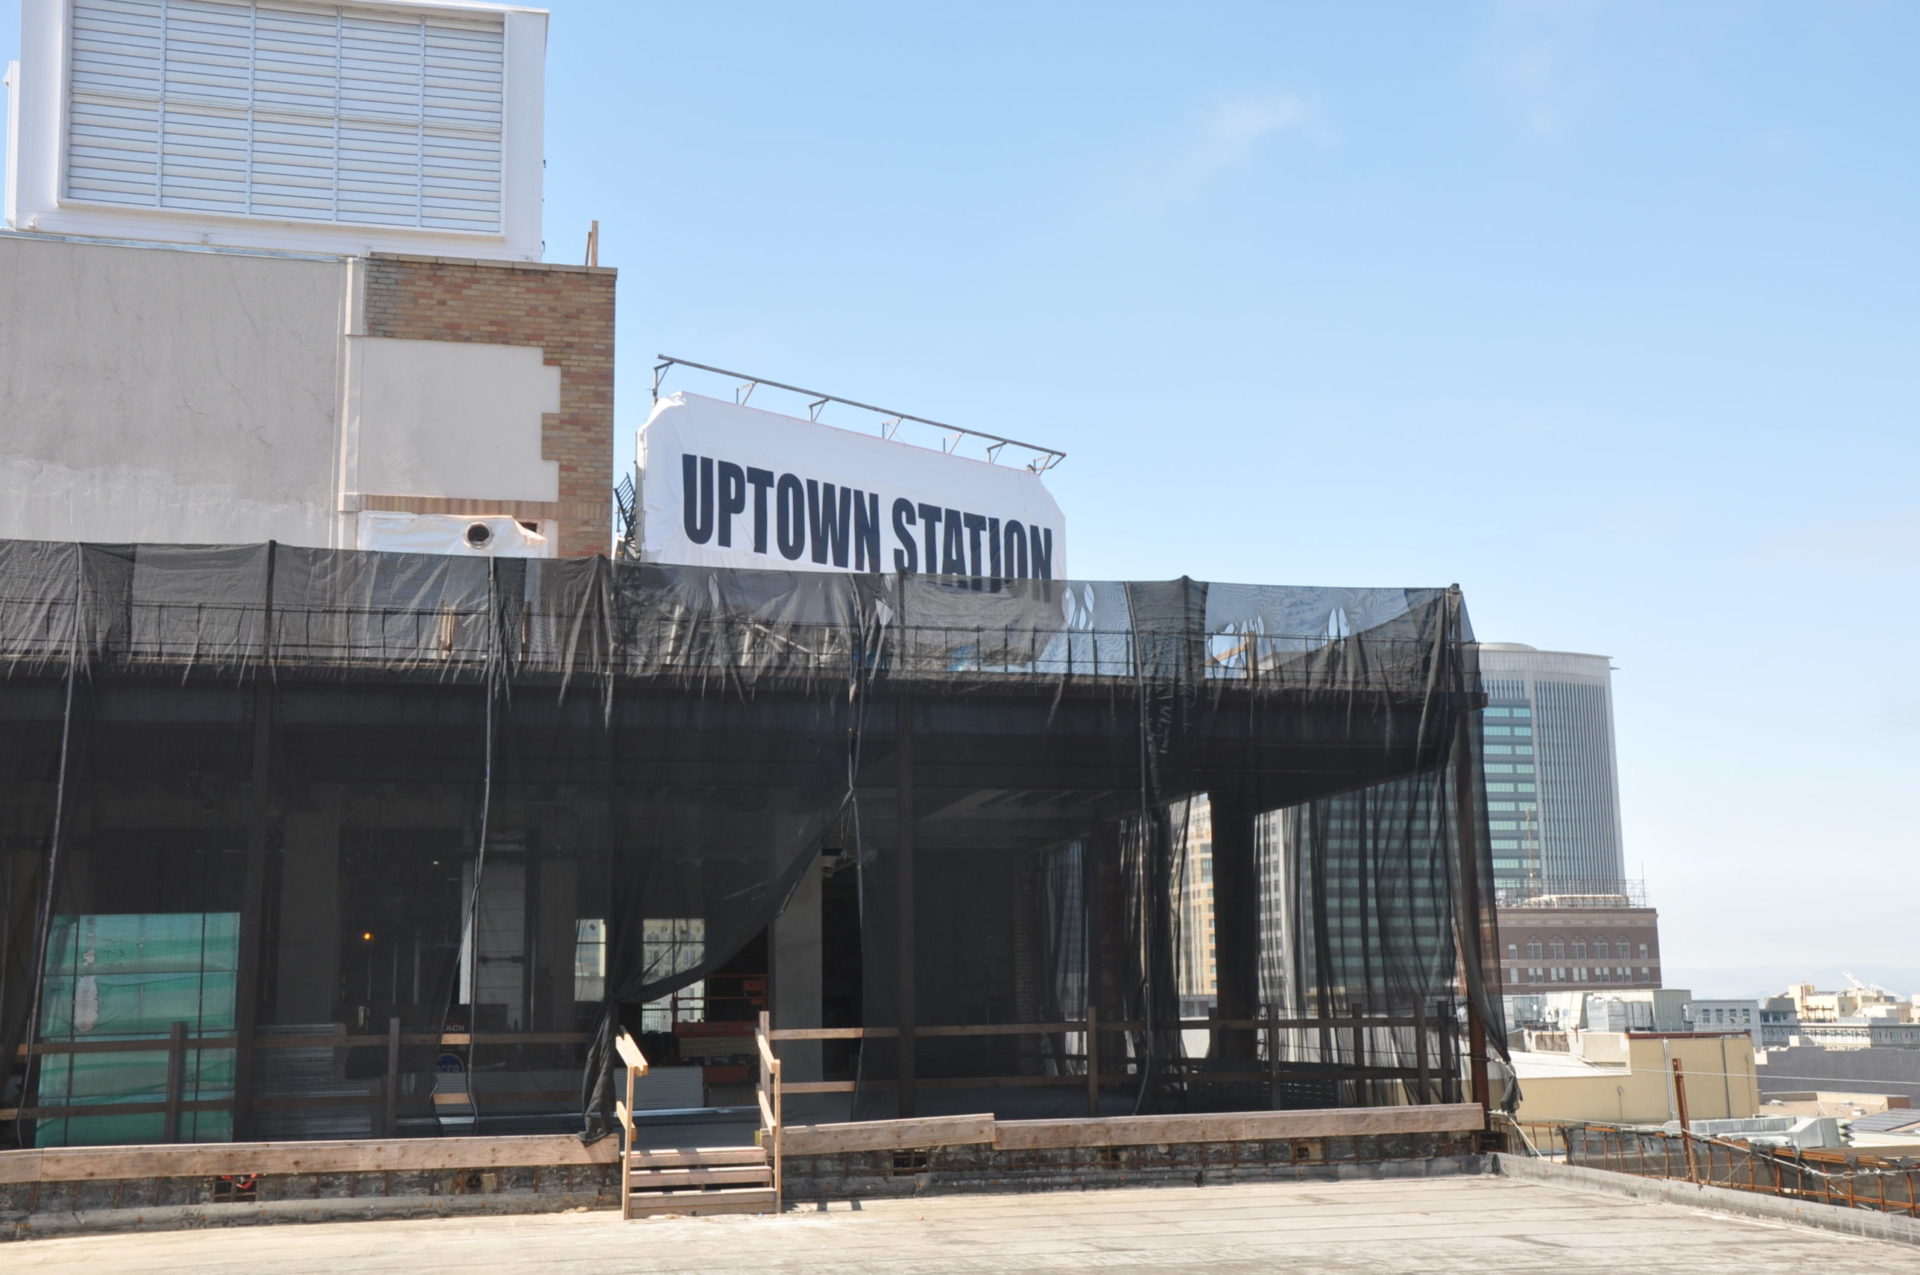 Image from the Gallery: Uptown Station – Oakland, CA